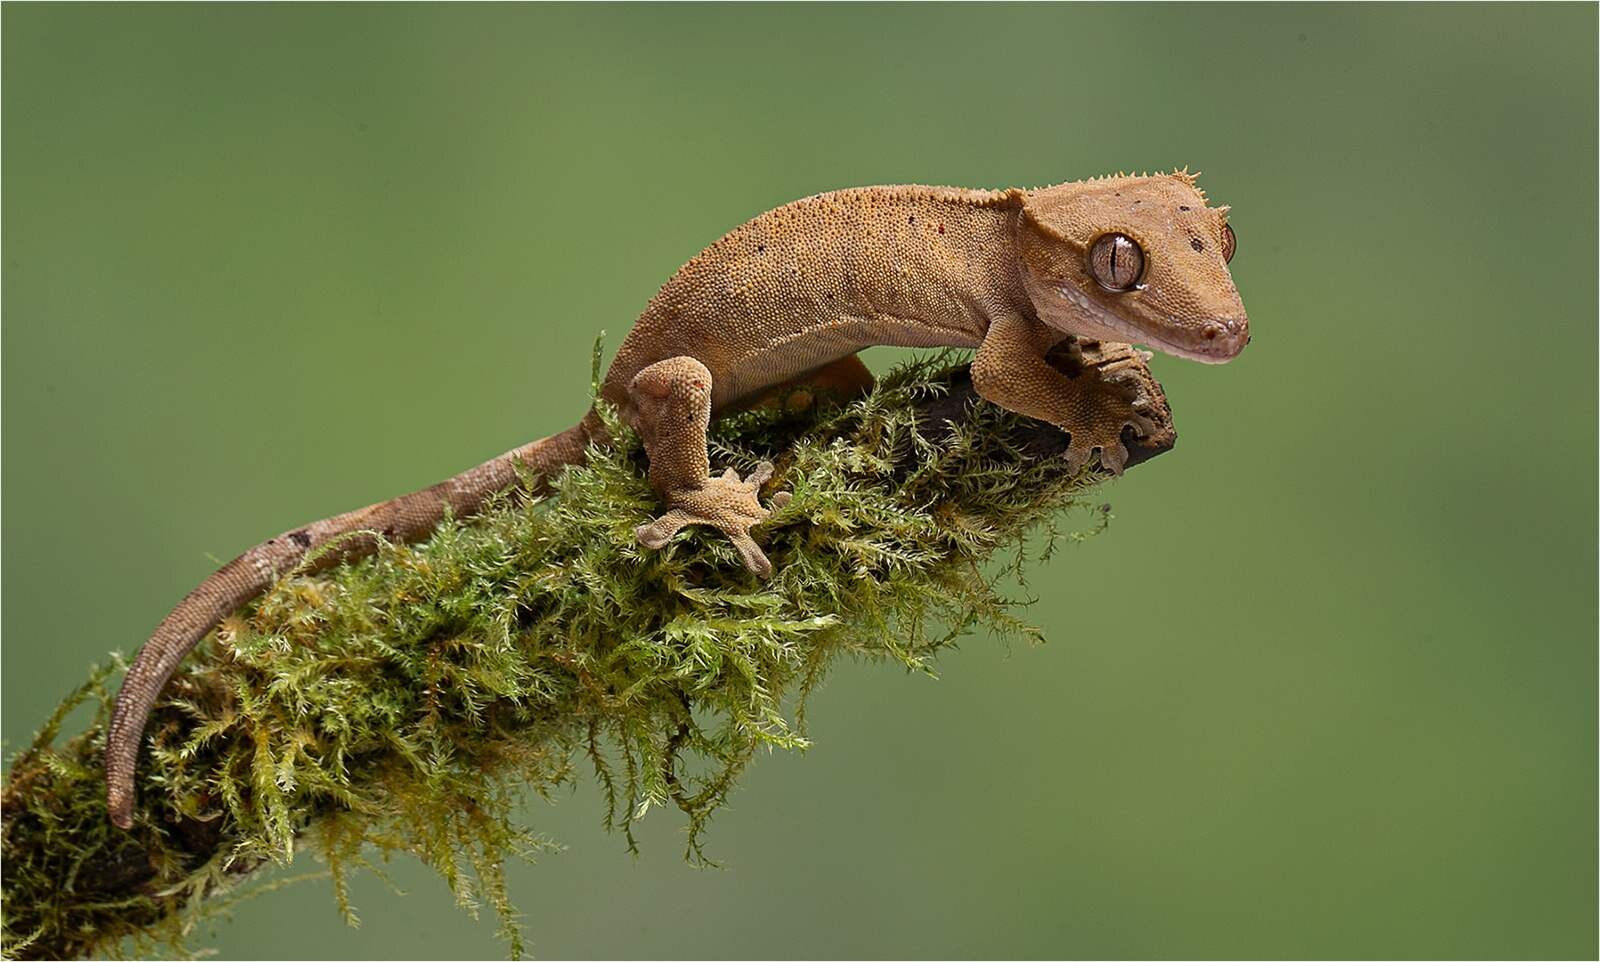 'Crested Gecko'